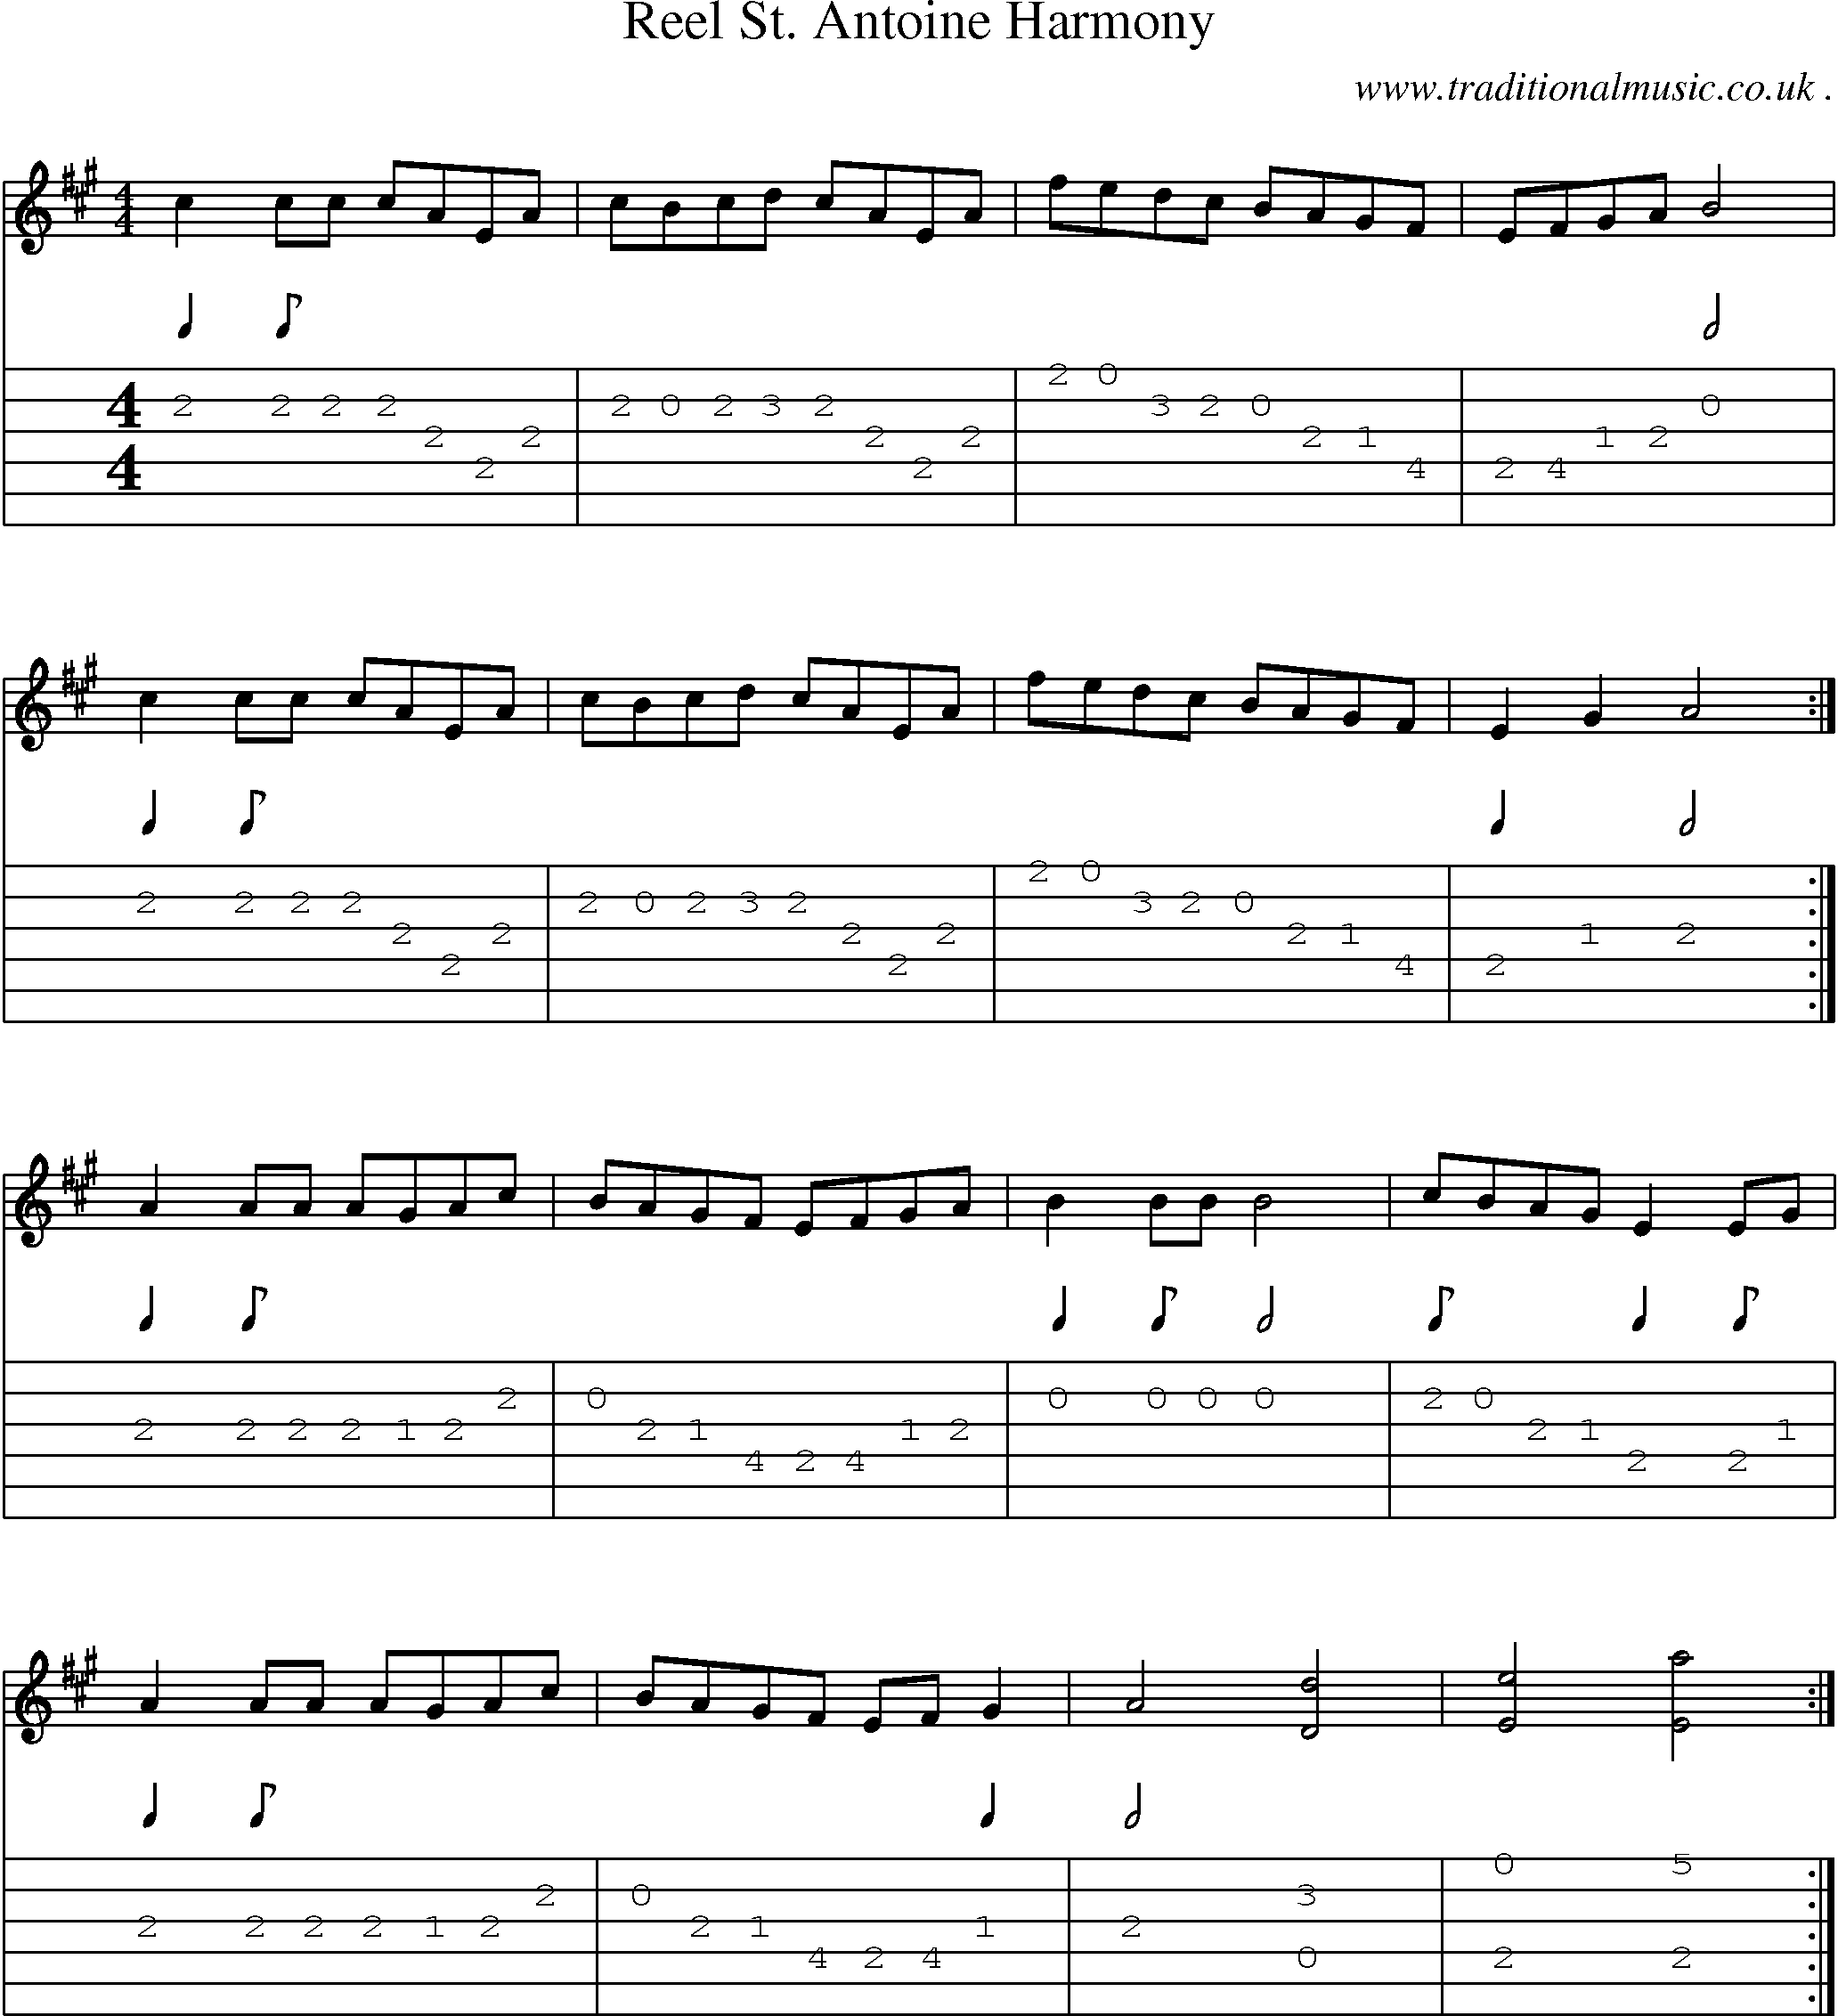 Music Score and Guitar Tabs for Reel St Antoine Harmony